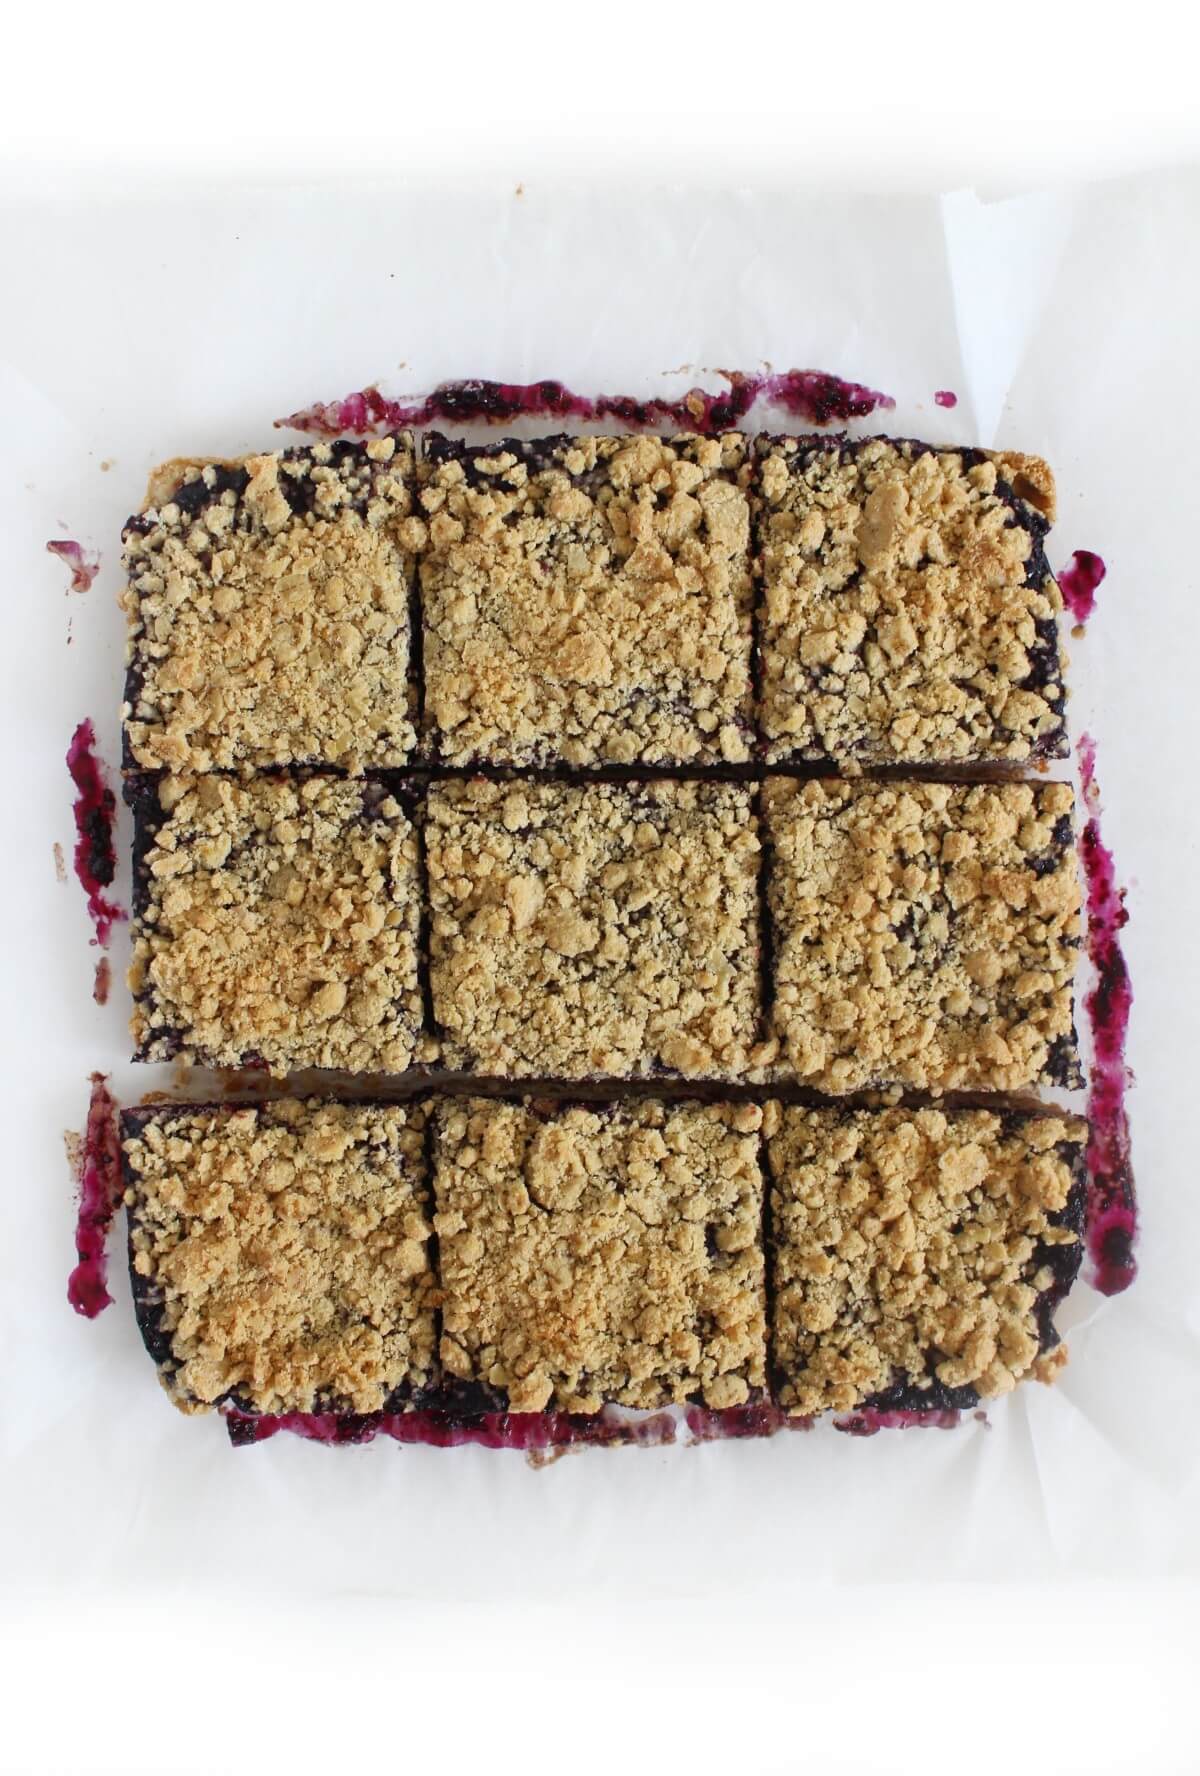 slicing the gluten-free blueberry jam bars into squares